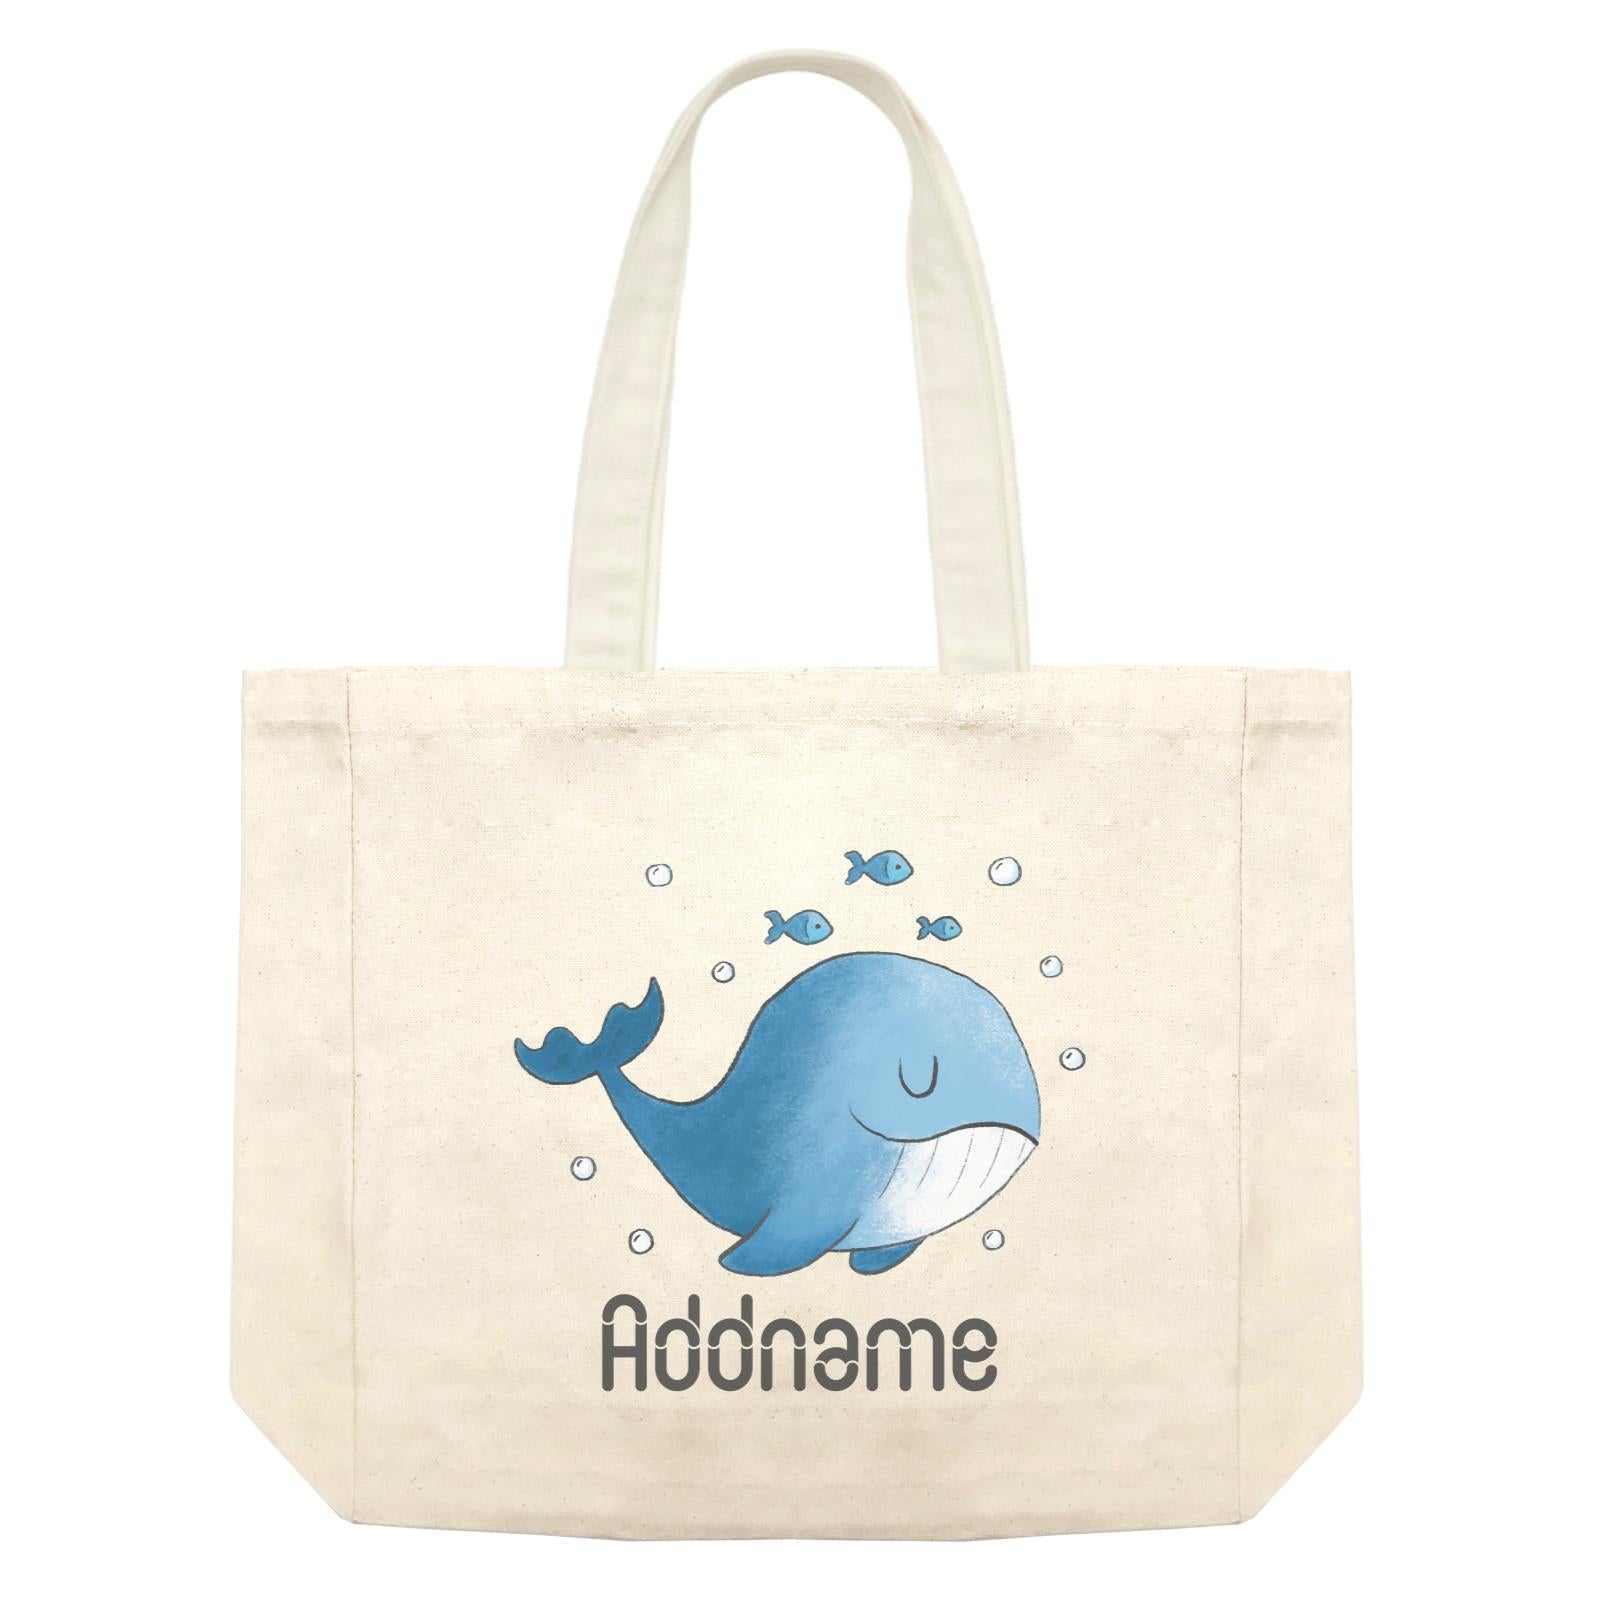 Cute Hand Drawn Style Whale Addname Shopping Bag